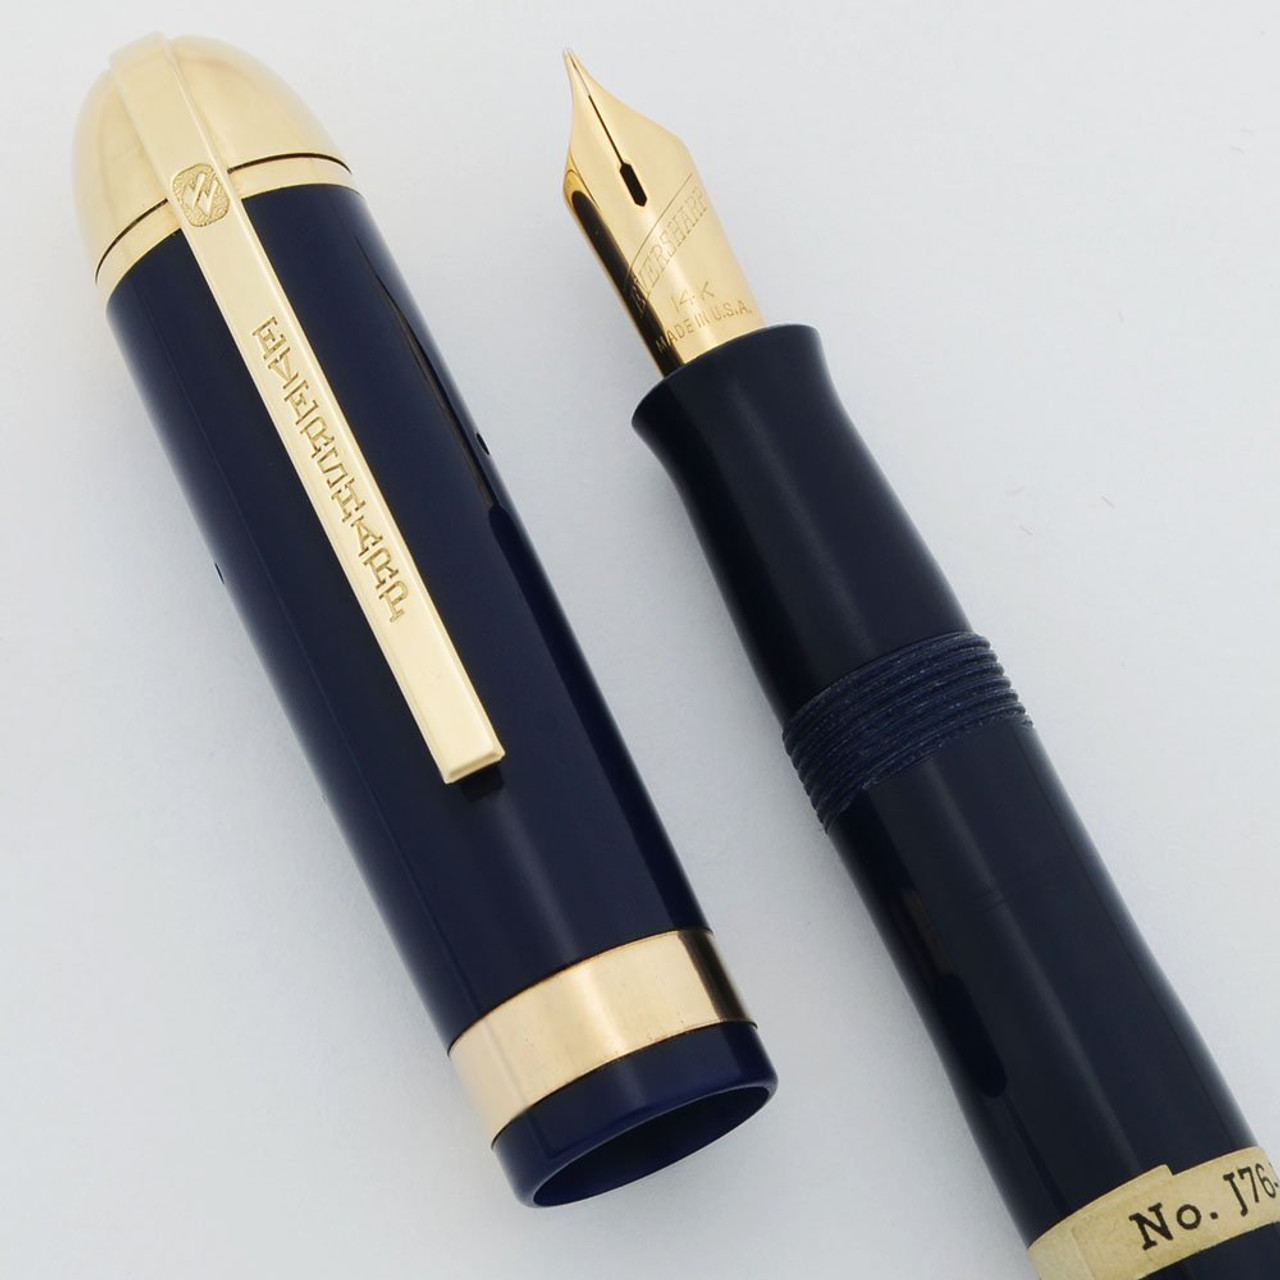 Eversharp Skyline Demi J76 Fountain Pen - Gold Derby & Wide Band, 14k Manifold Nibs (New Old Stock, Restored)